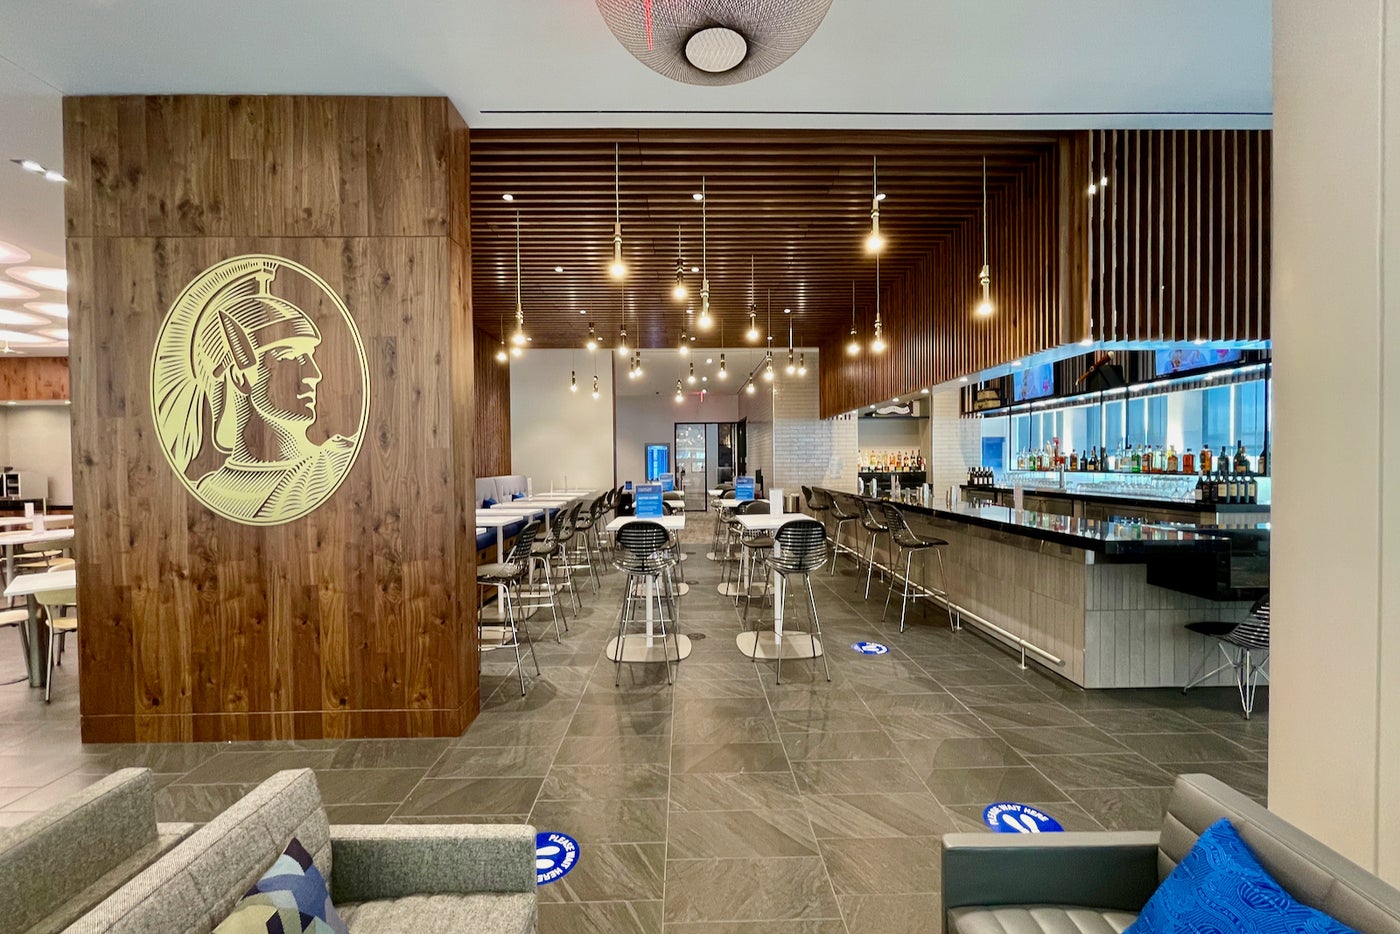 Amex reveals updated opening dates for new Centurion Lounges